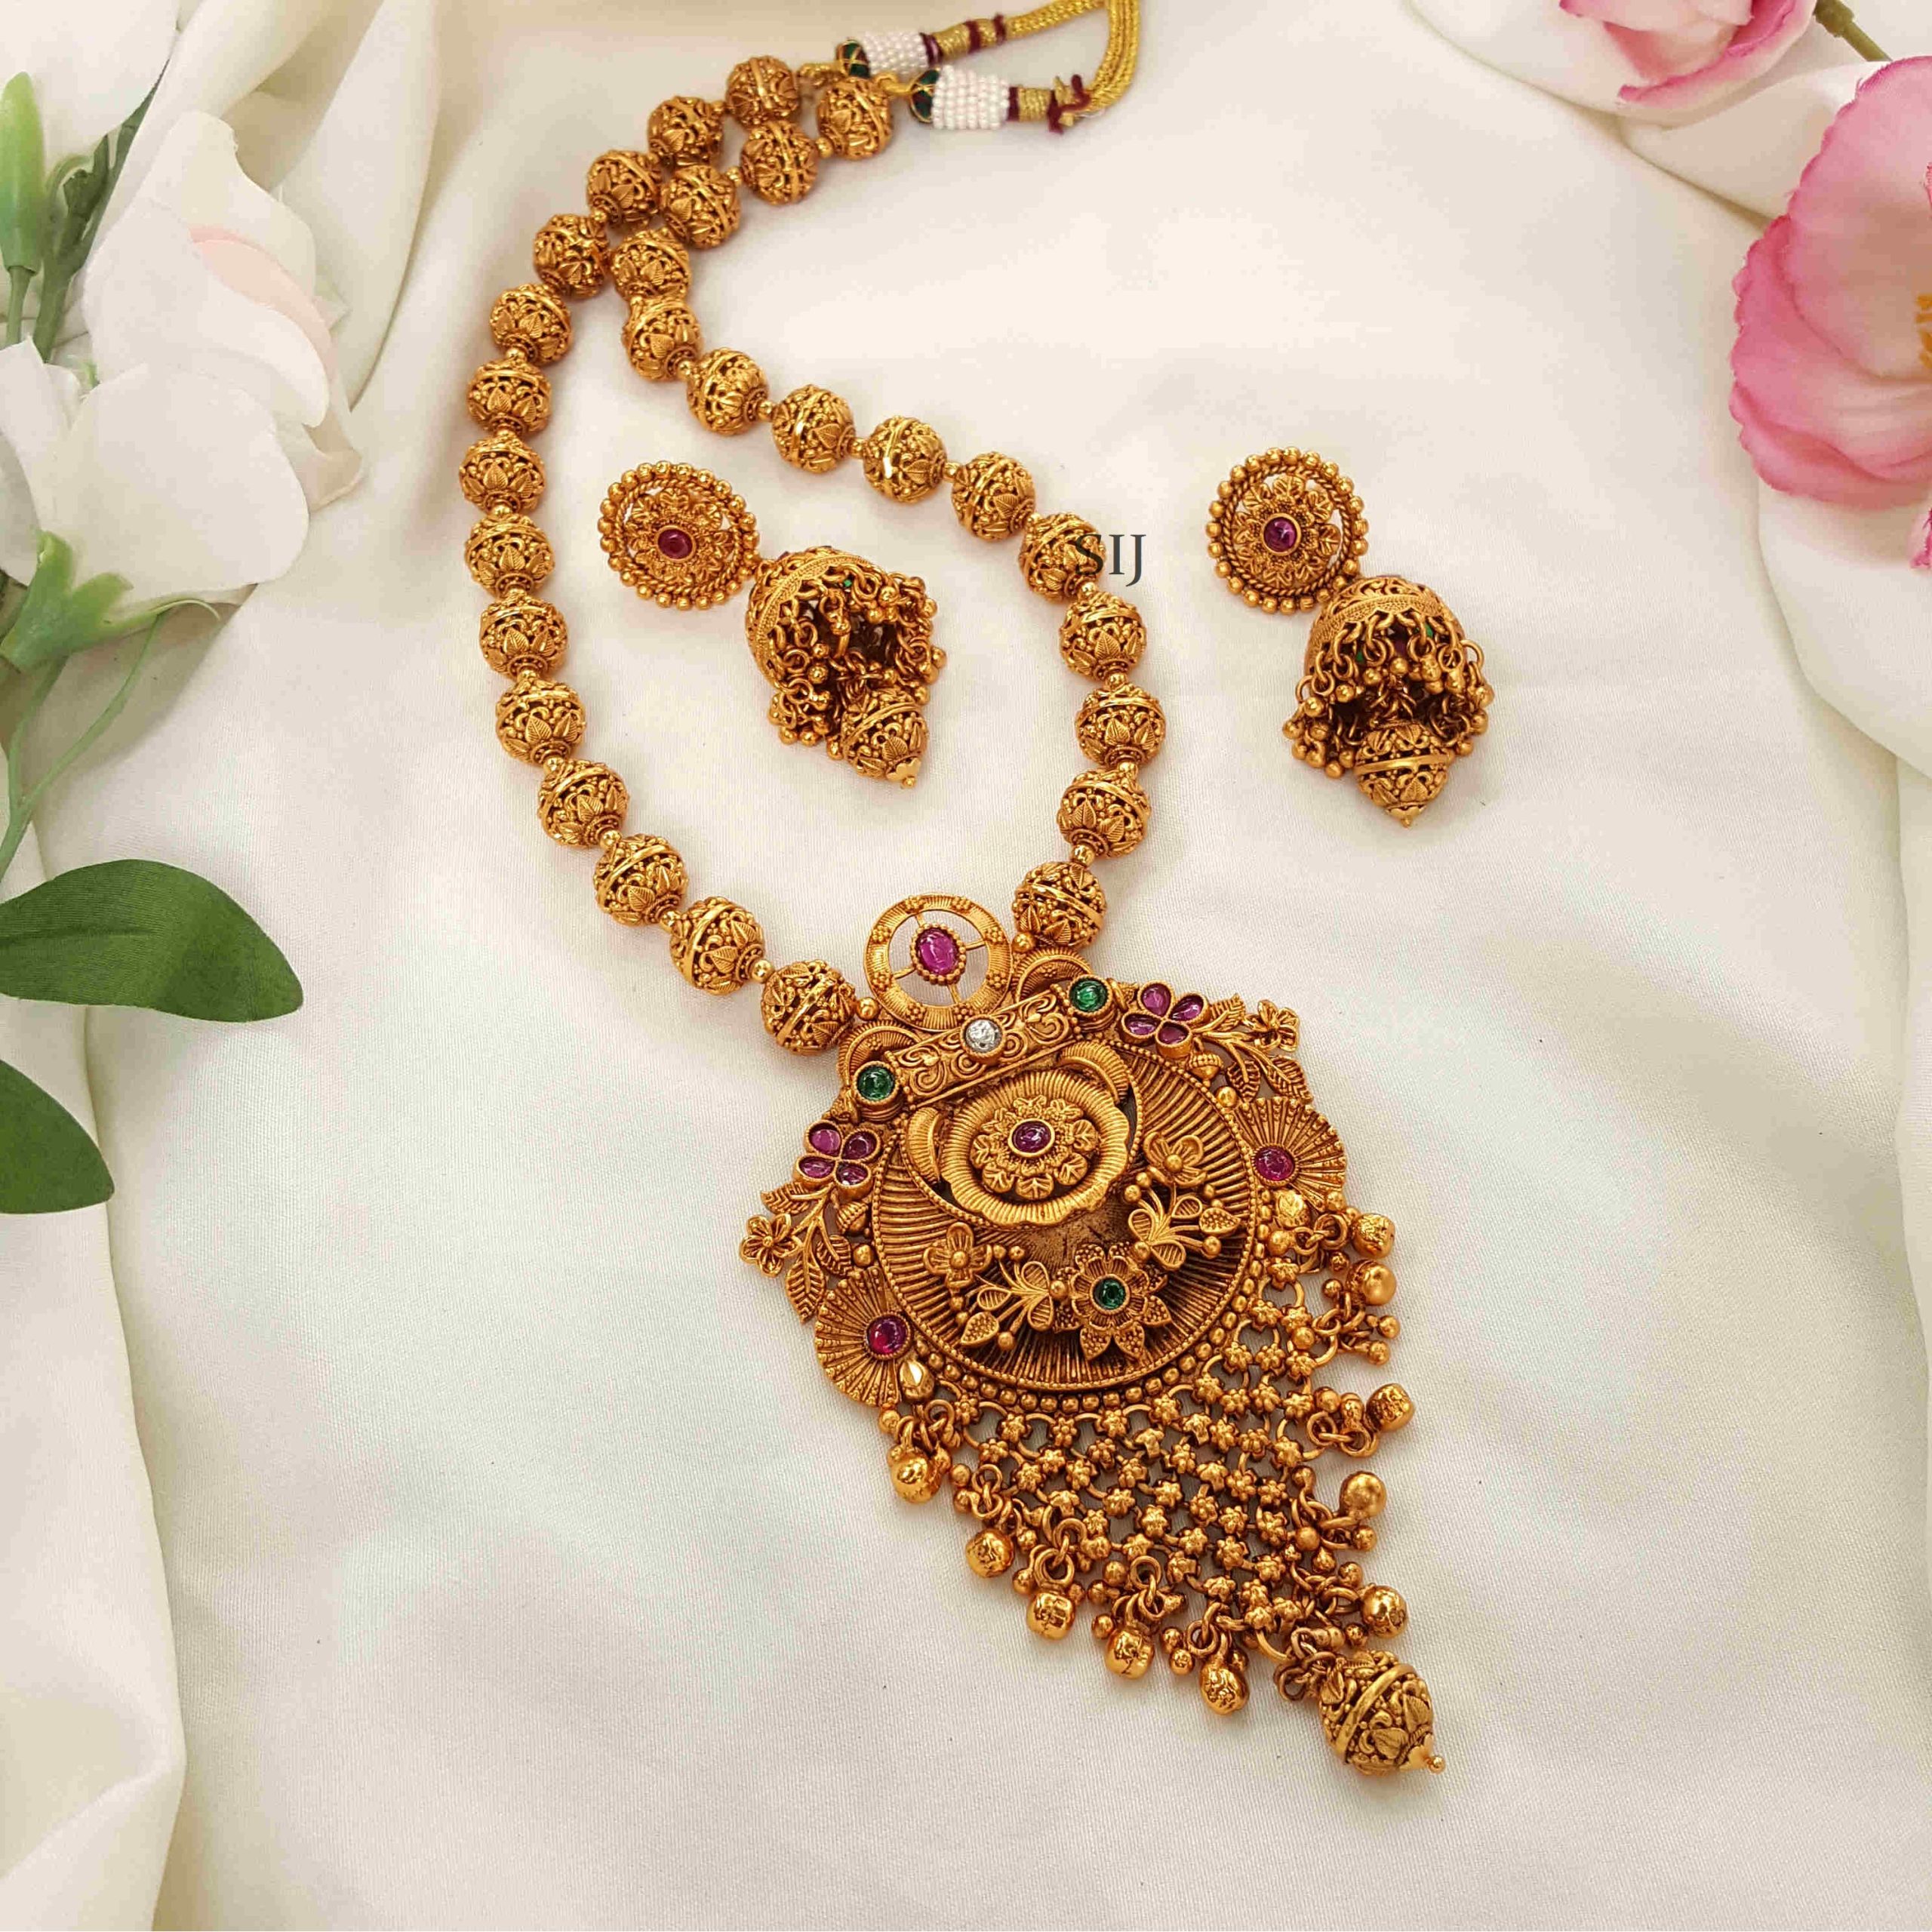 Gorgeous Gold Beads Haram with Floral Designed Pendant